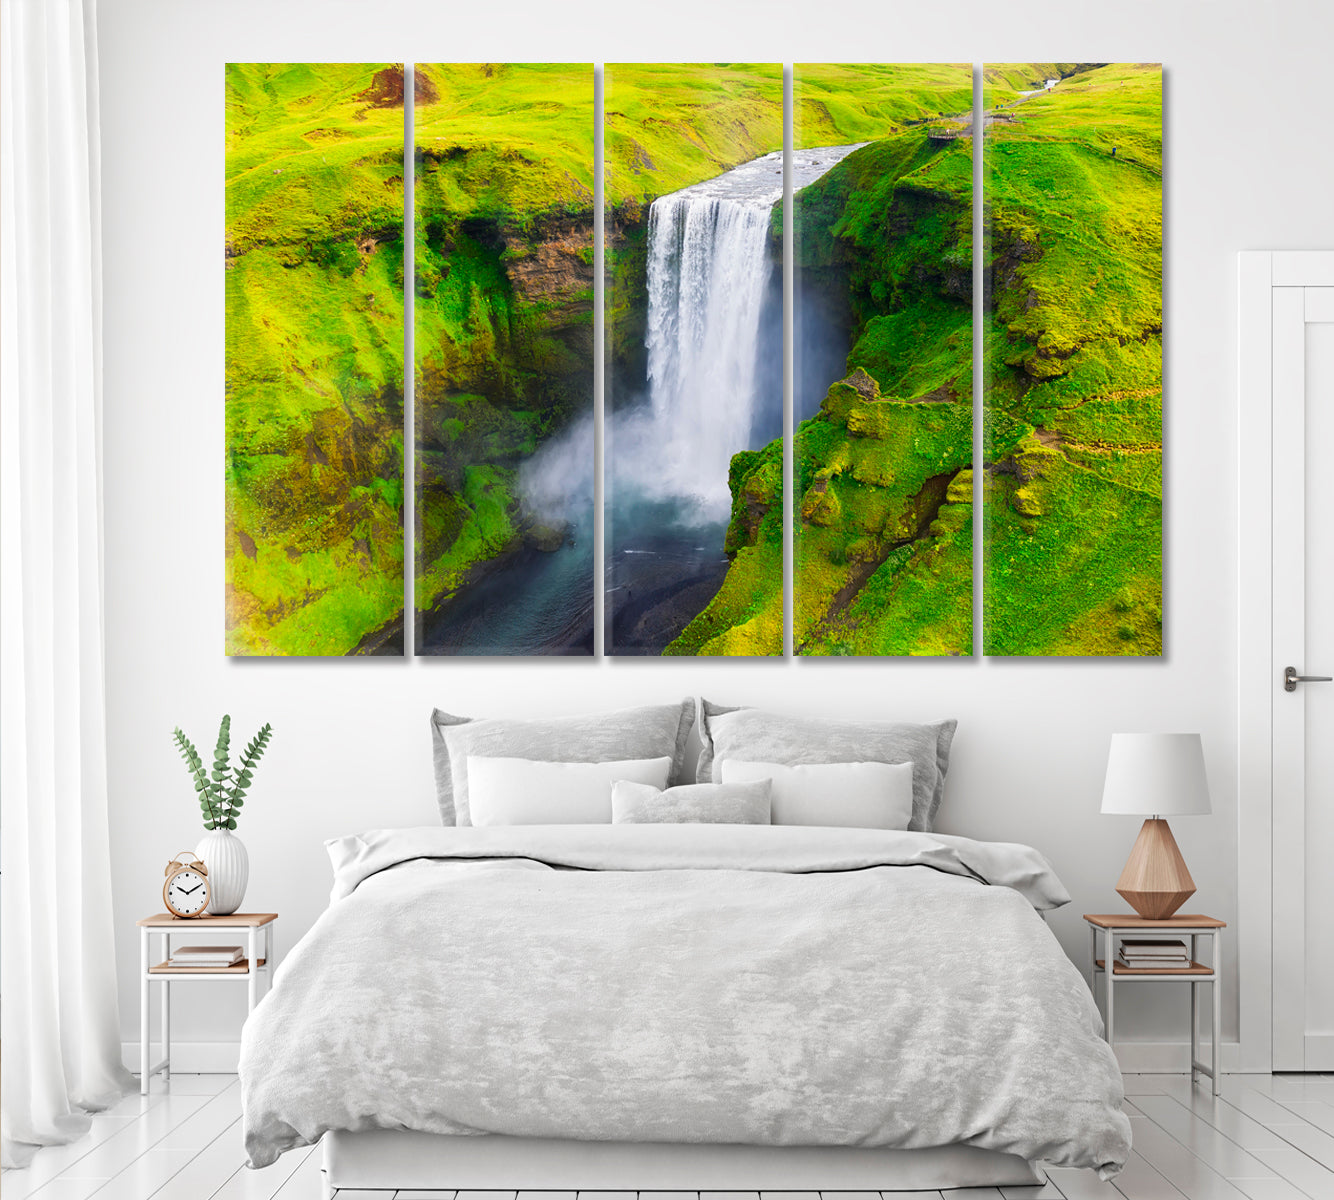 Iceland Landscape with Skogafoss Waterfall Canvas Print ArtLexy 5 Panels 36"x24" inches 